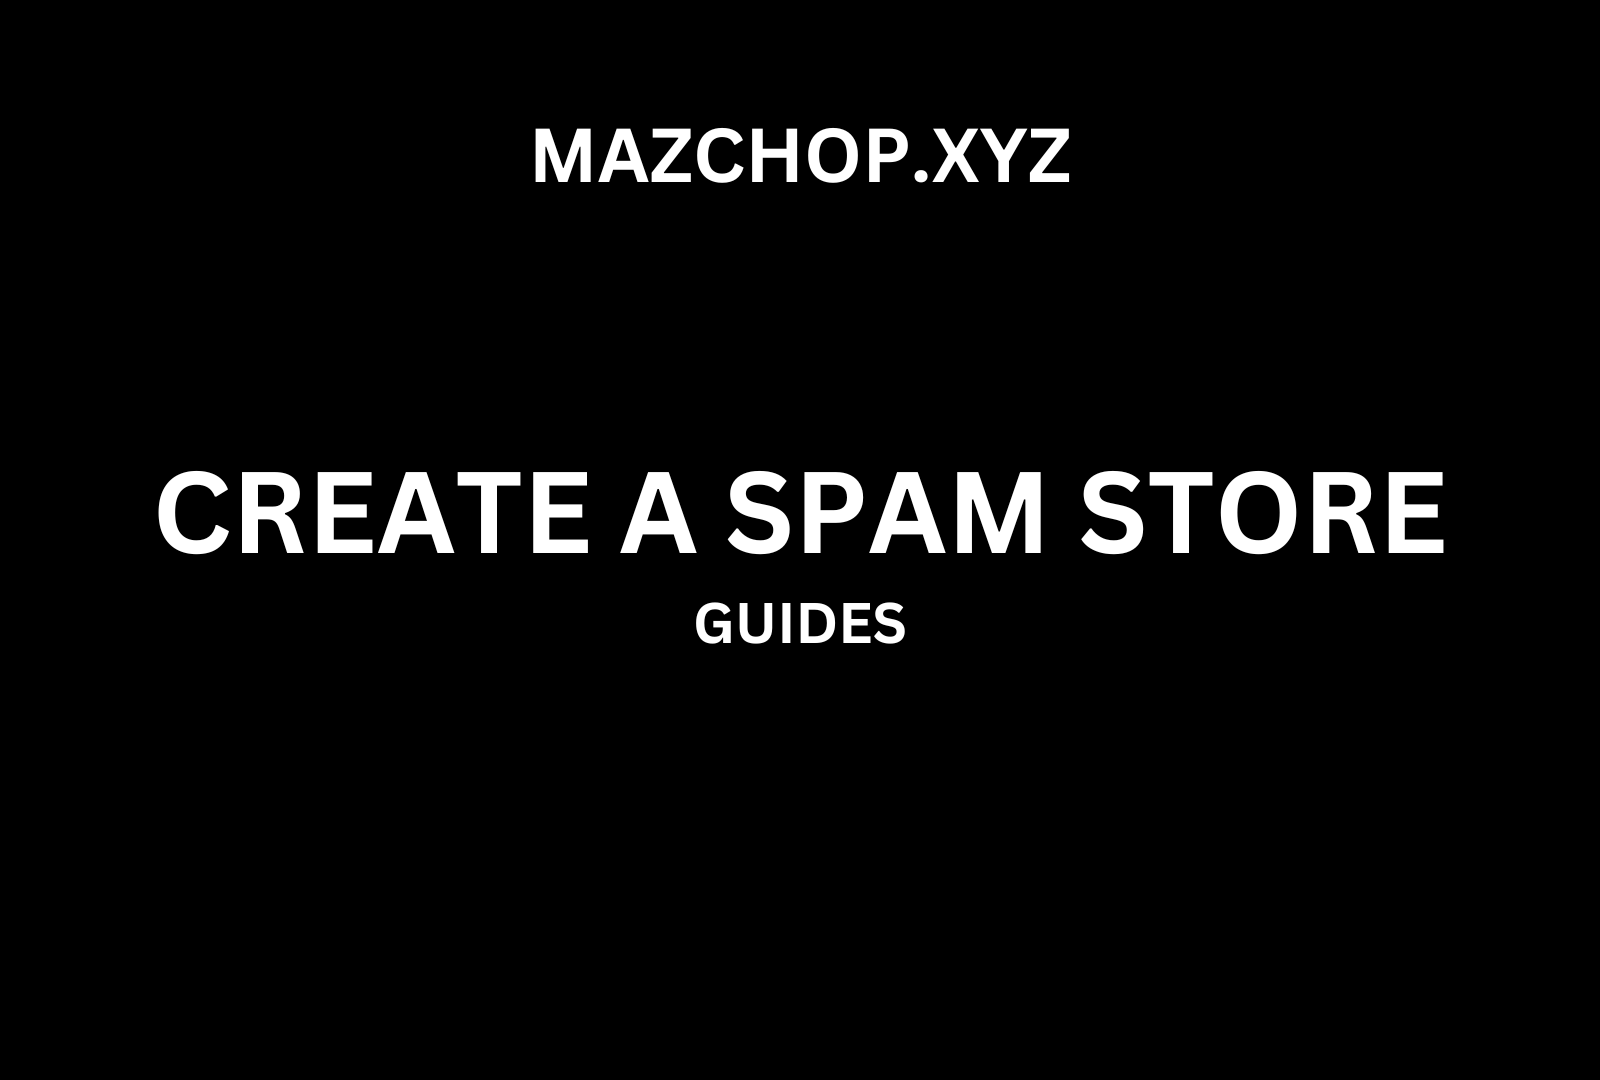 Create Your Own Spam Store